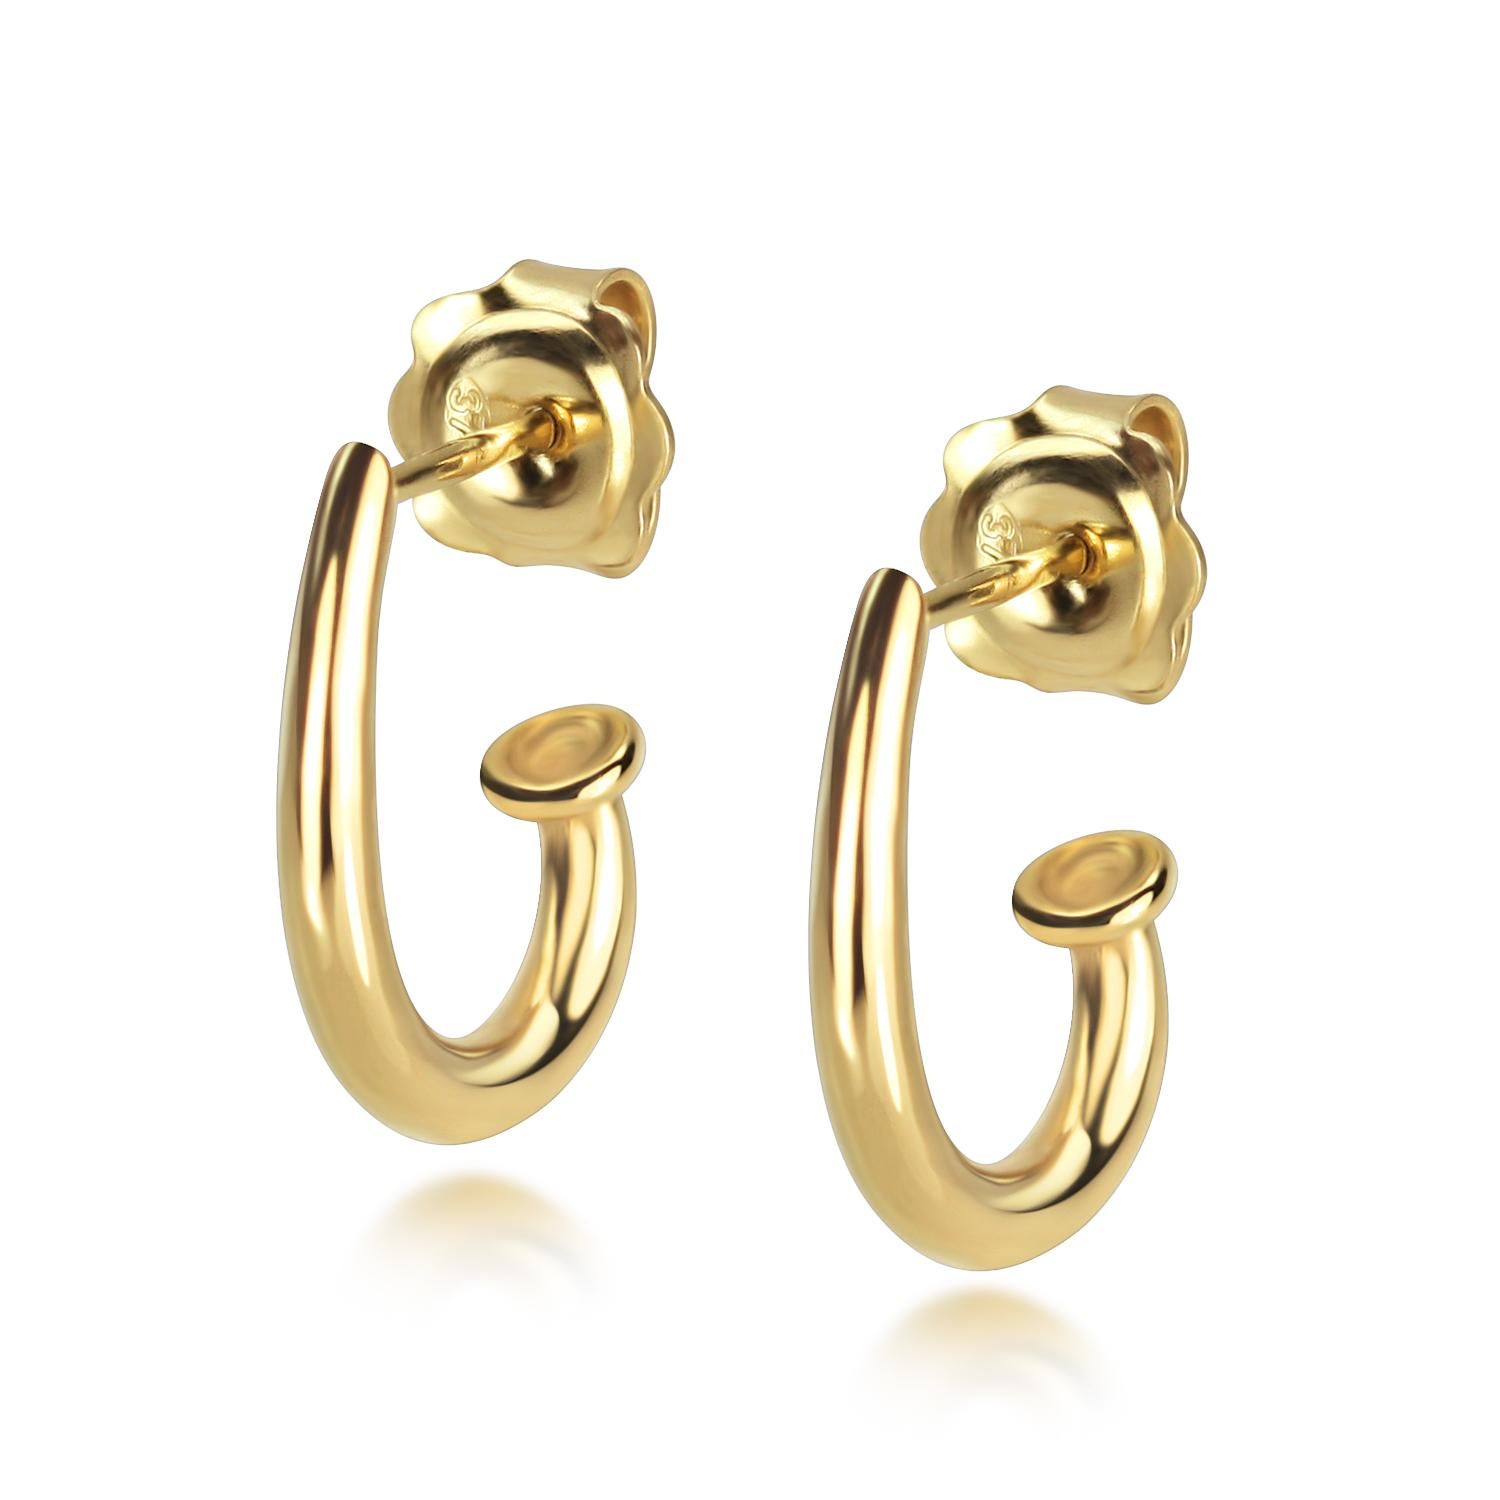 Glowing with golden elegance.
Elegant ‘Juno Drop Hoop Stud’ earrings with a graceful taper. They are comforting, subtle glamour for day-to-day that you will come back to time and again.
Paired with the ‘Juno Ear Pendant ~ Citrine, they elevate the